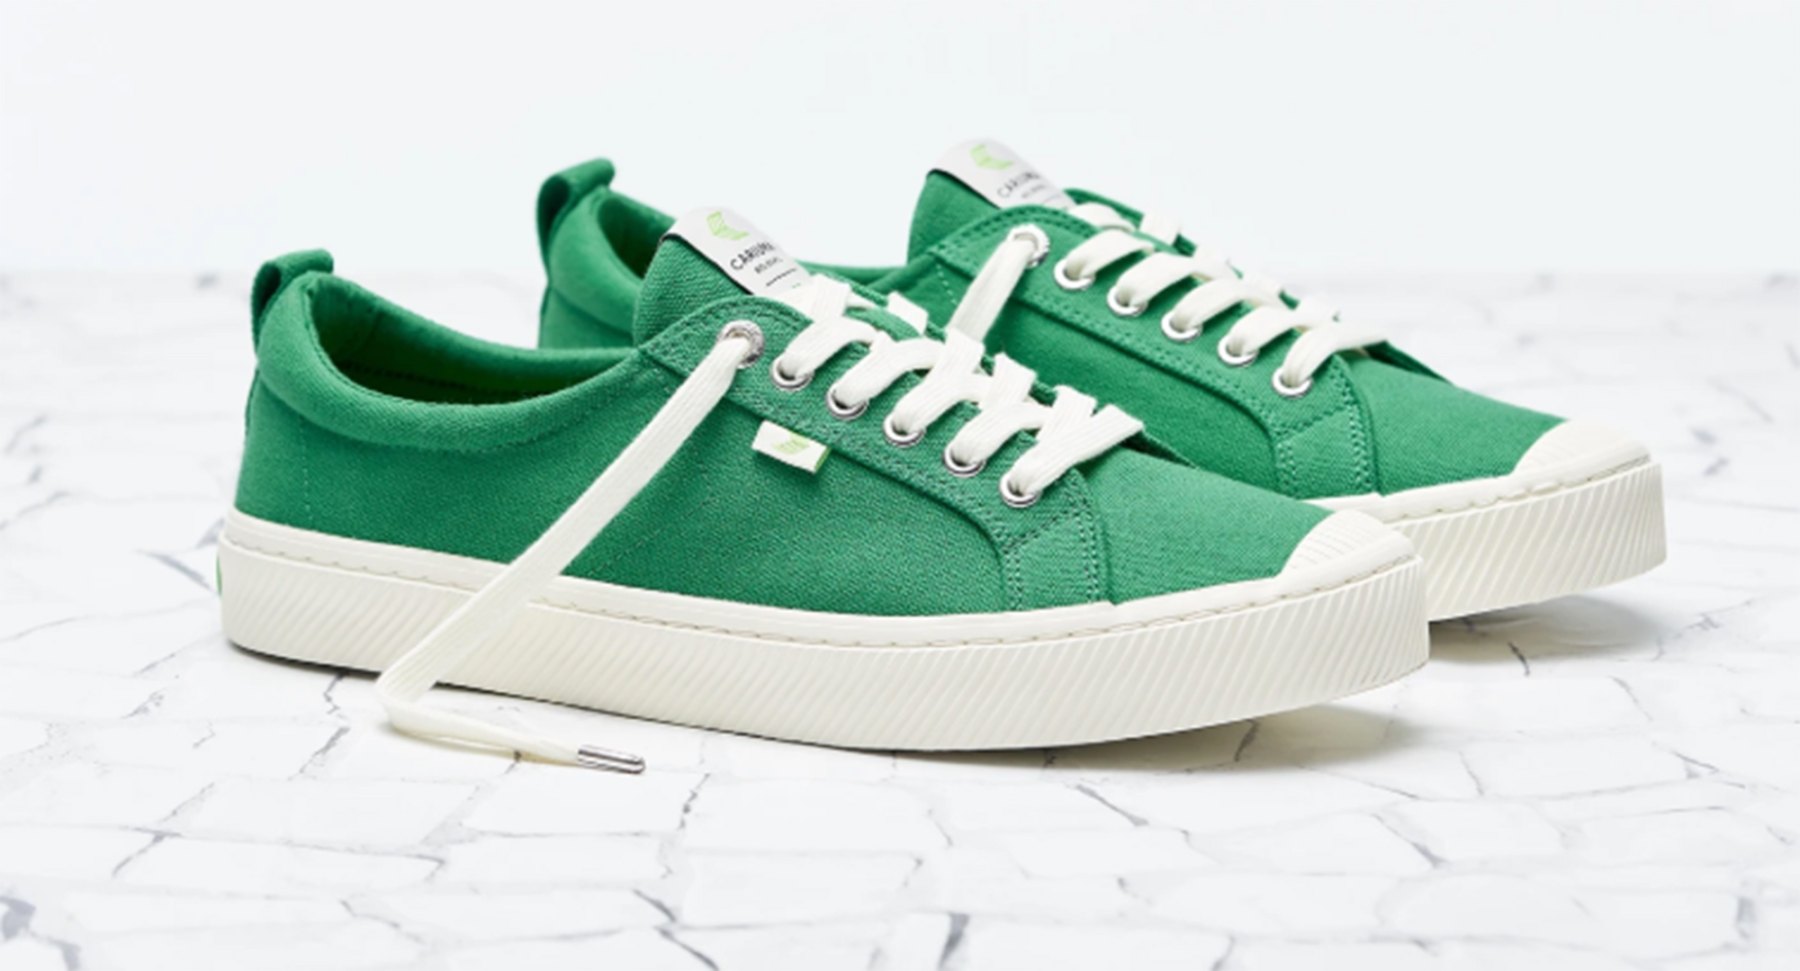 Cariuma Bestselling Low Top Sneakers Are Officially Back in Stock